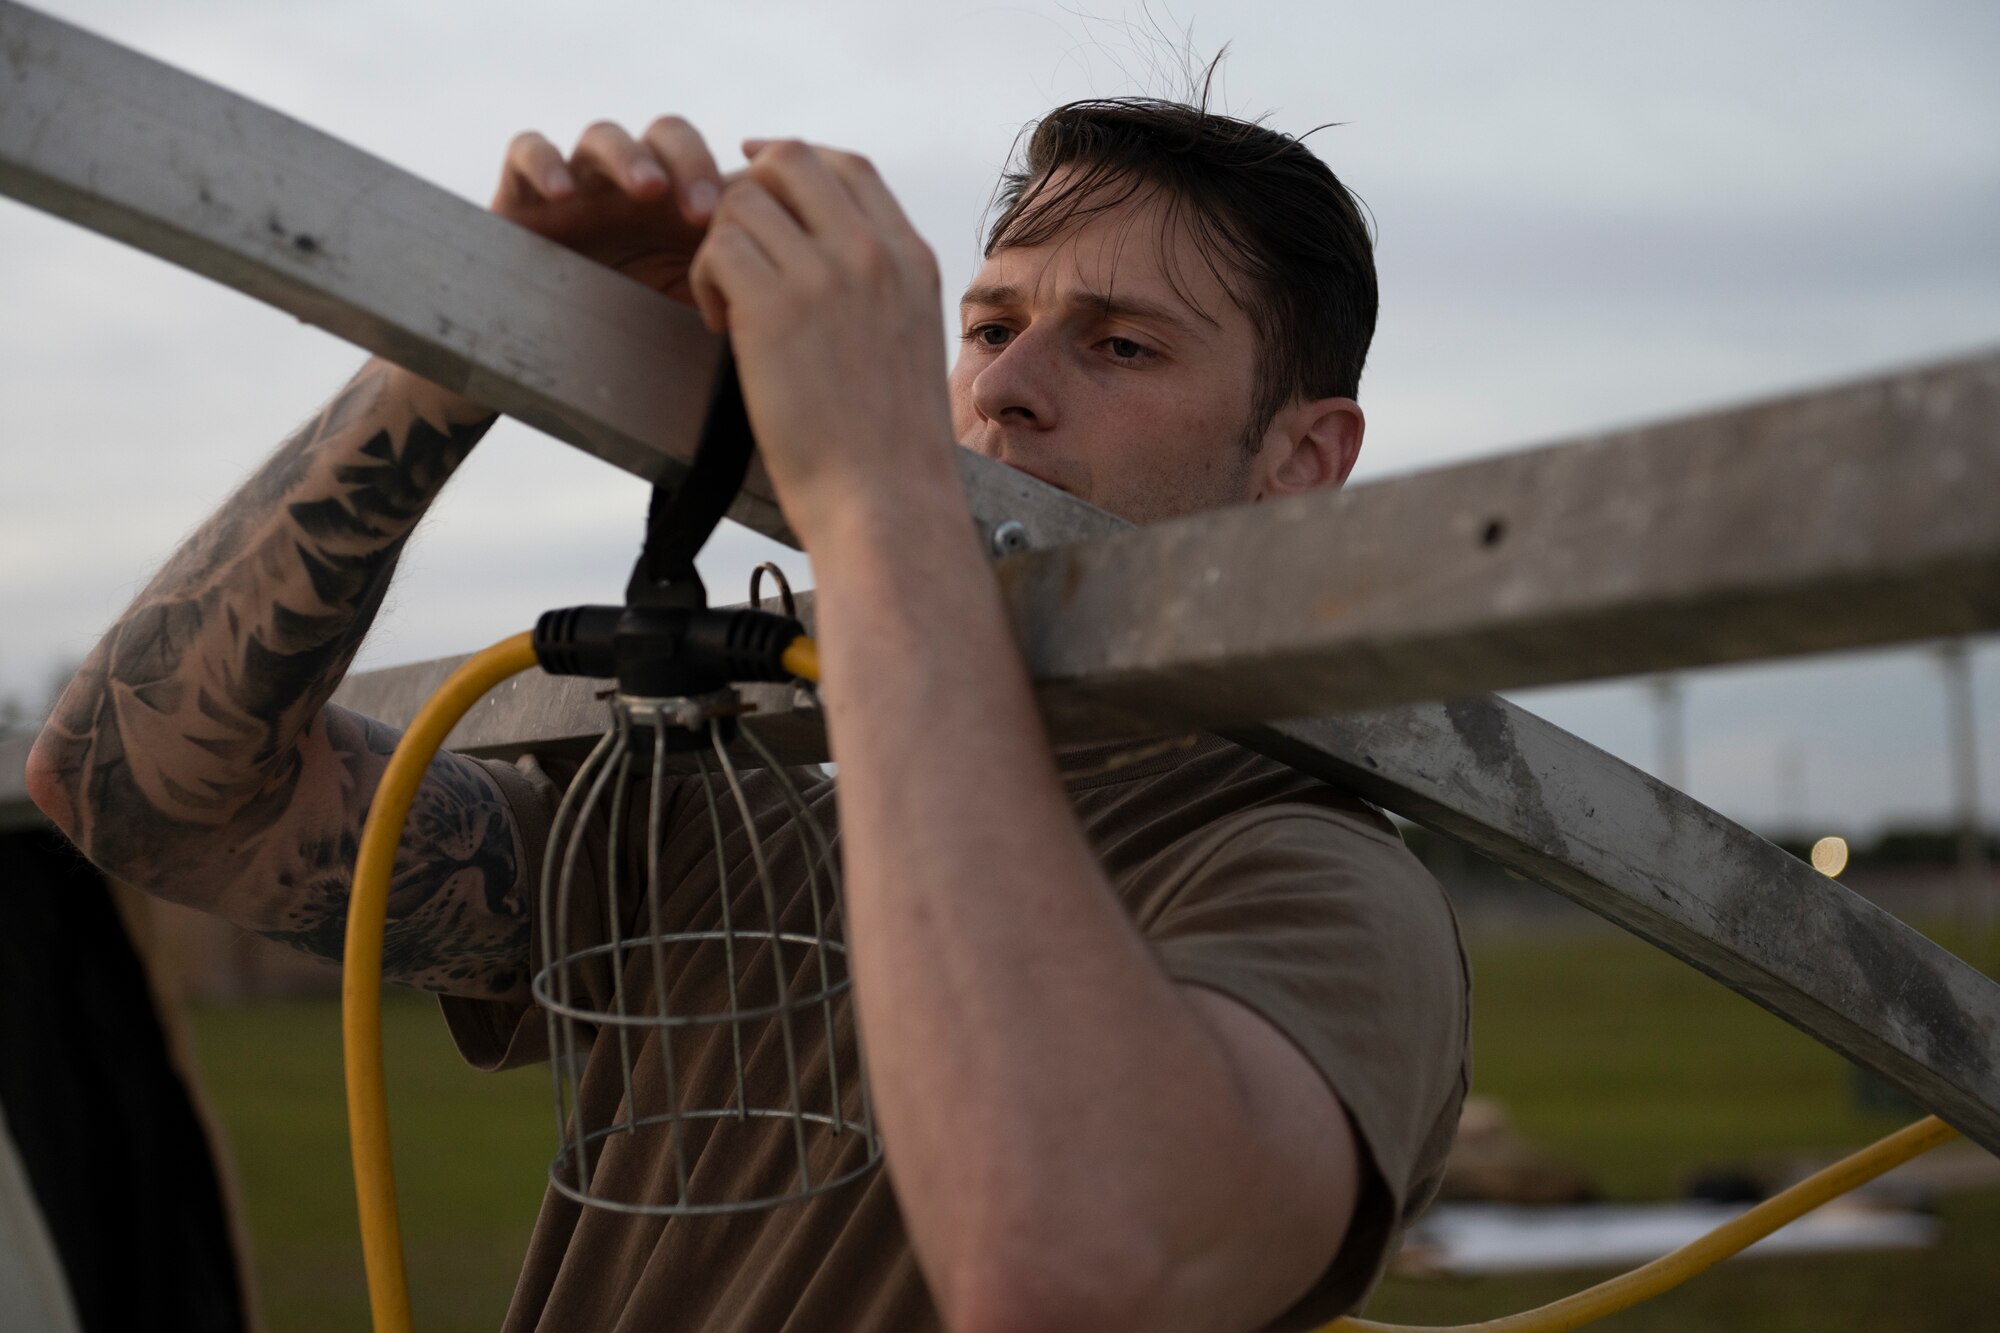 U.S. Air Force Staff Sgt. Travis Cain, 23rd Munitions Squadron conventional maintenance crew chief, assembles a light on a shelter for exercise Ready Tiger 24-1 at Avon Park Air Force Range, Florida, April 8, 2024. Airmen from various specialties assisted the 23rd Civil Engineer Squadron to assemble the shelters. During Ready Tiger 24-1, the 23rd Wing will be evaluated on the integration of Air Force Force Generation principles such as Agile Combat Employment, integrated combat turns, forward aerial refueling points, multi-capable Airmen, and combat search and rescue capabilities. (U.S. Air Force photo by Senior Airman Rachel Coates)